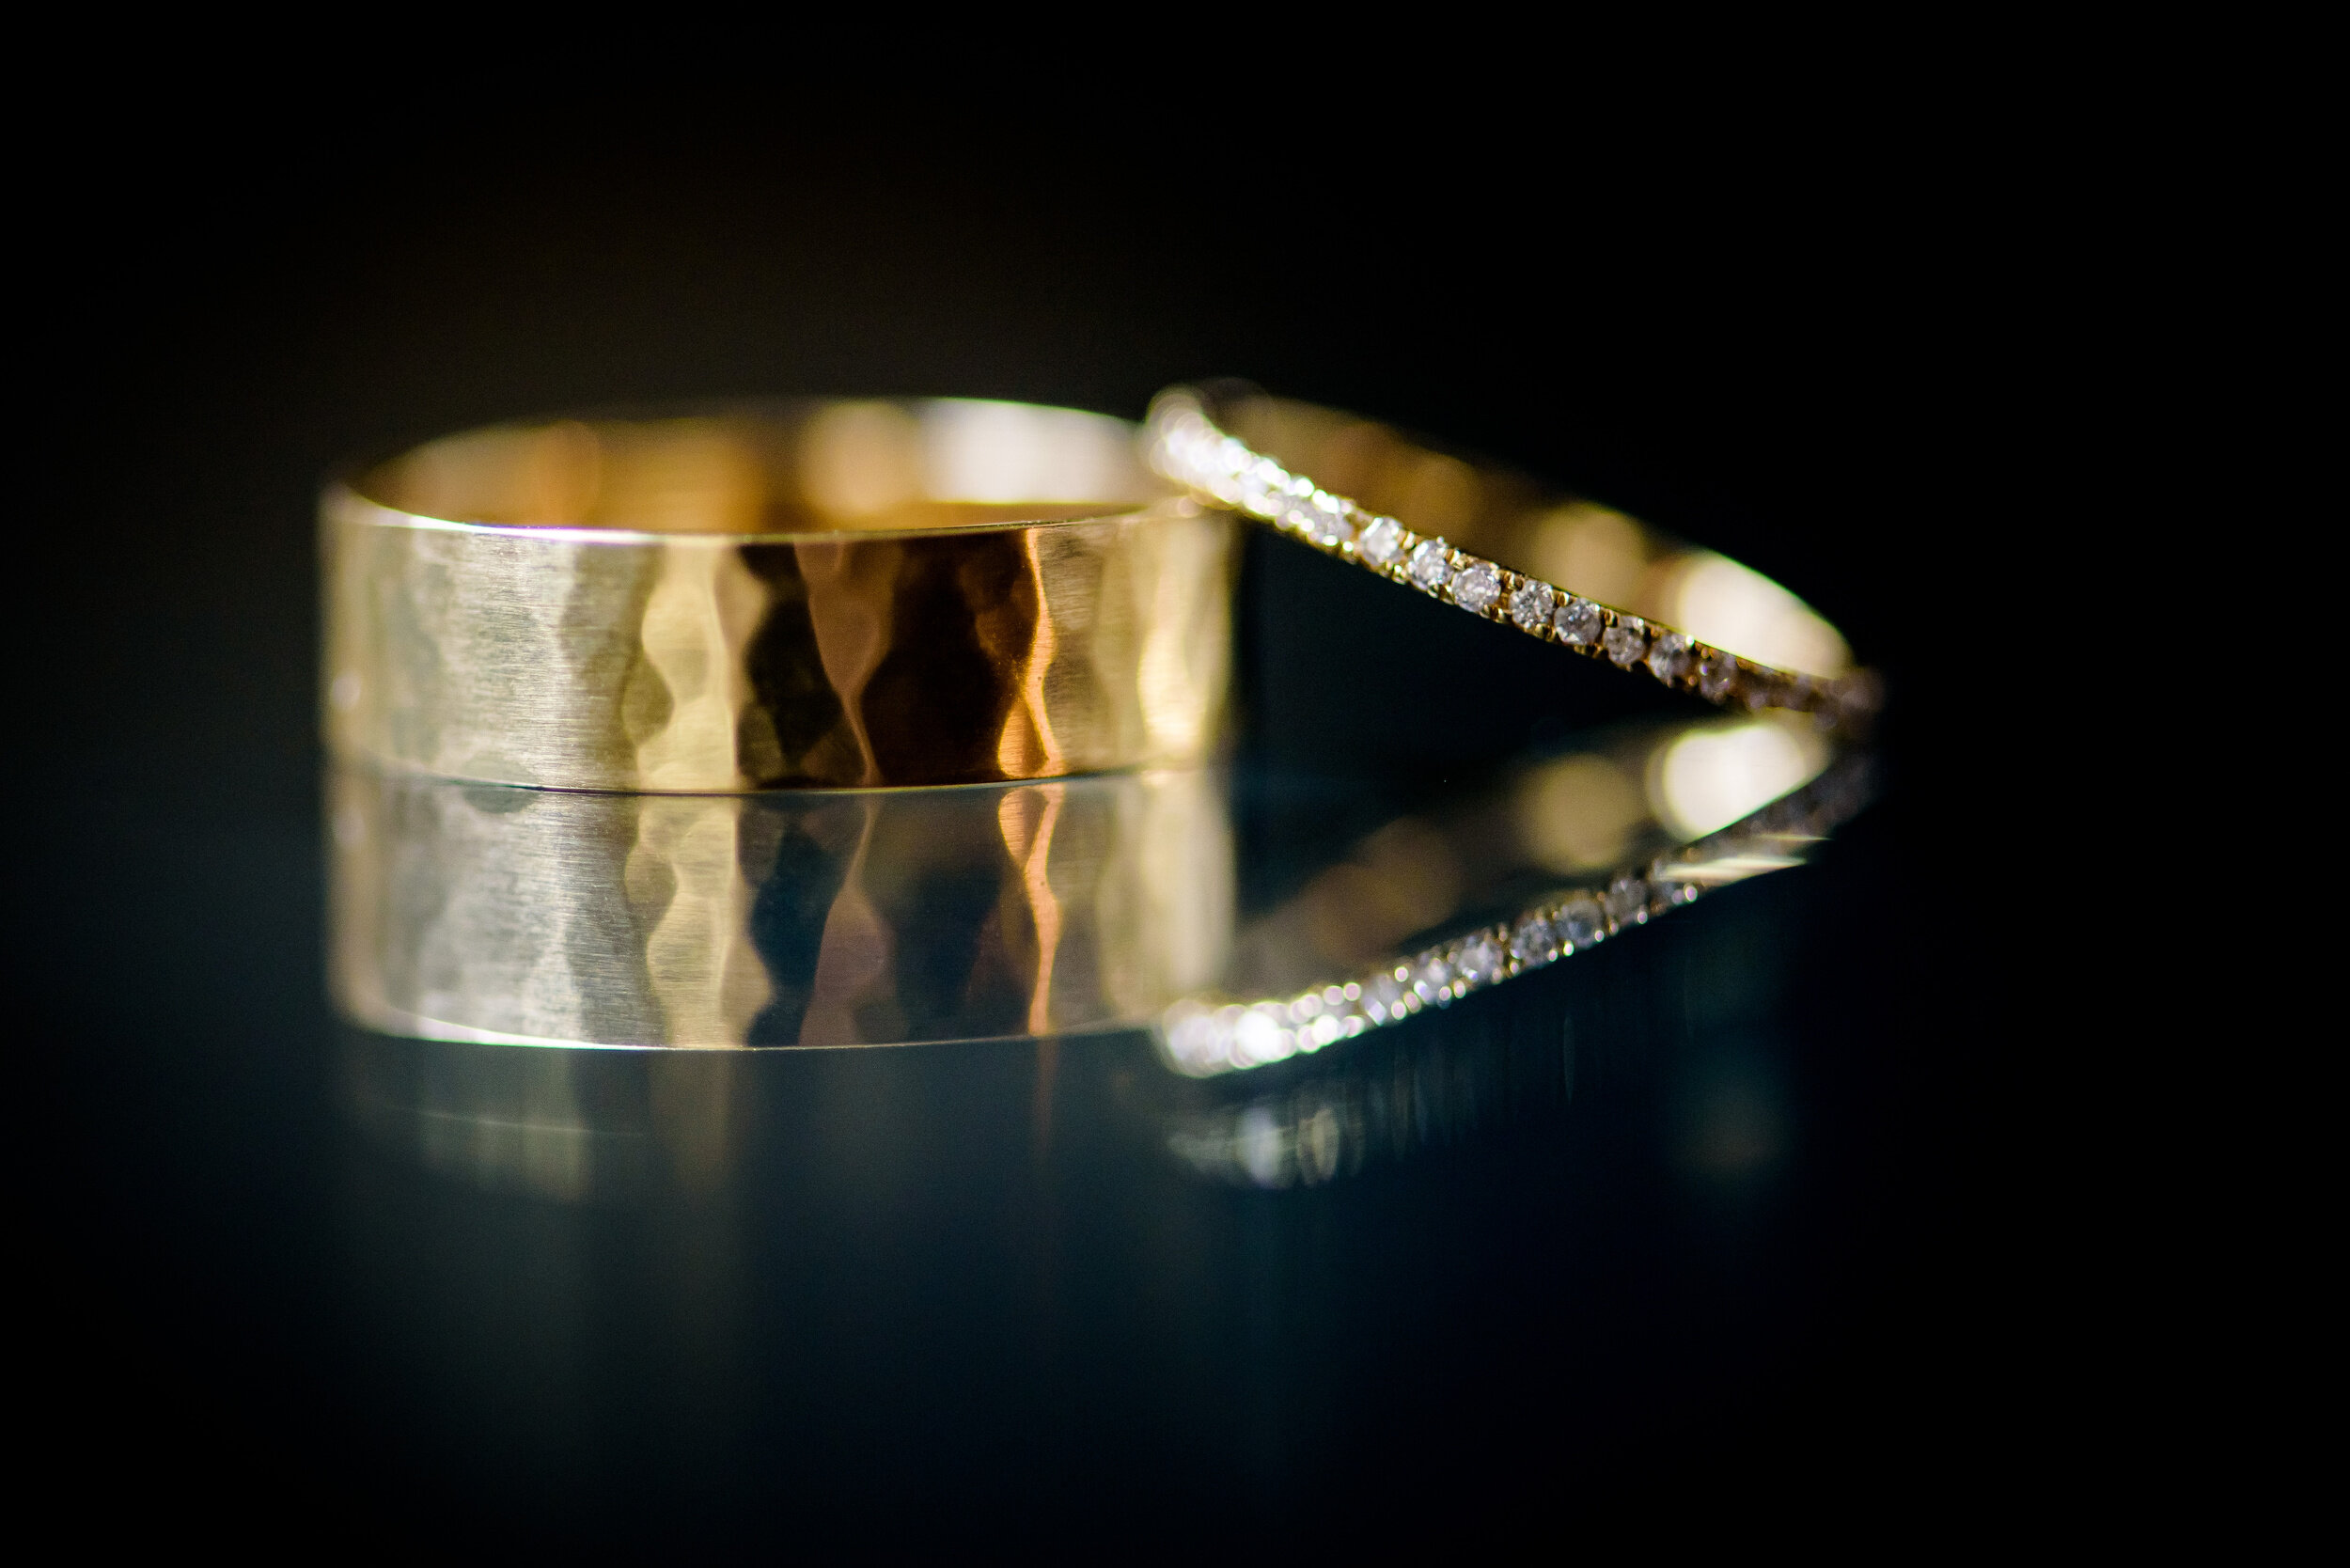 Wedding ring detail photo: Geraghty Chicago wedding photography captured by J. Brown Photography.